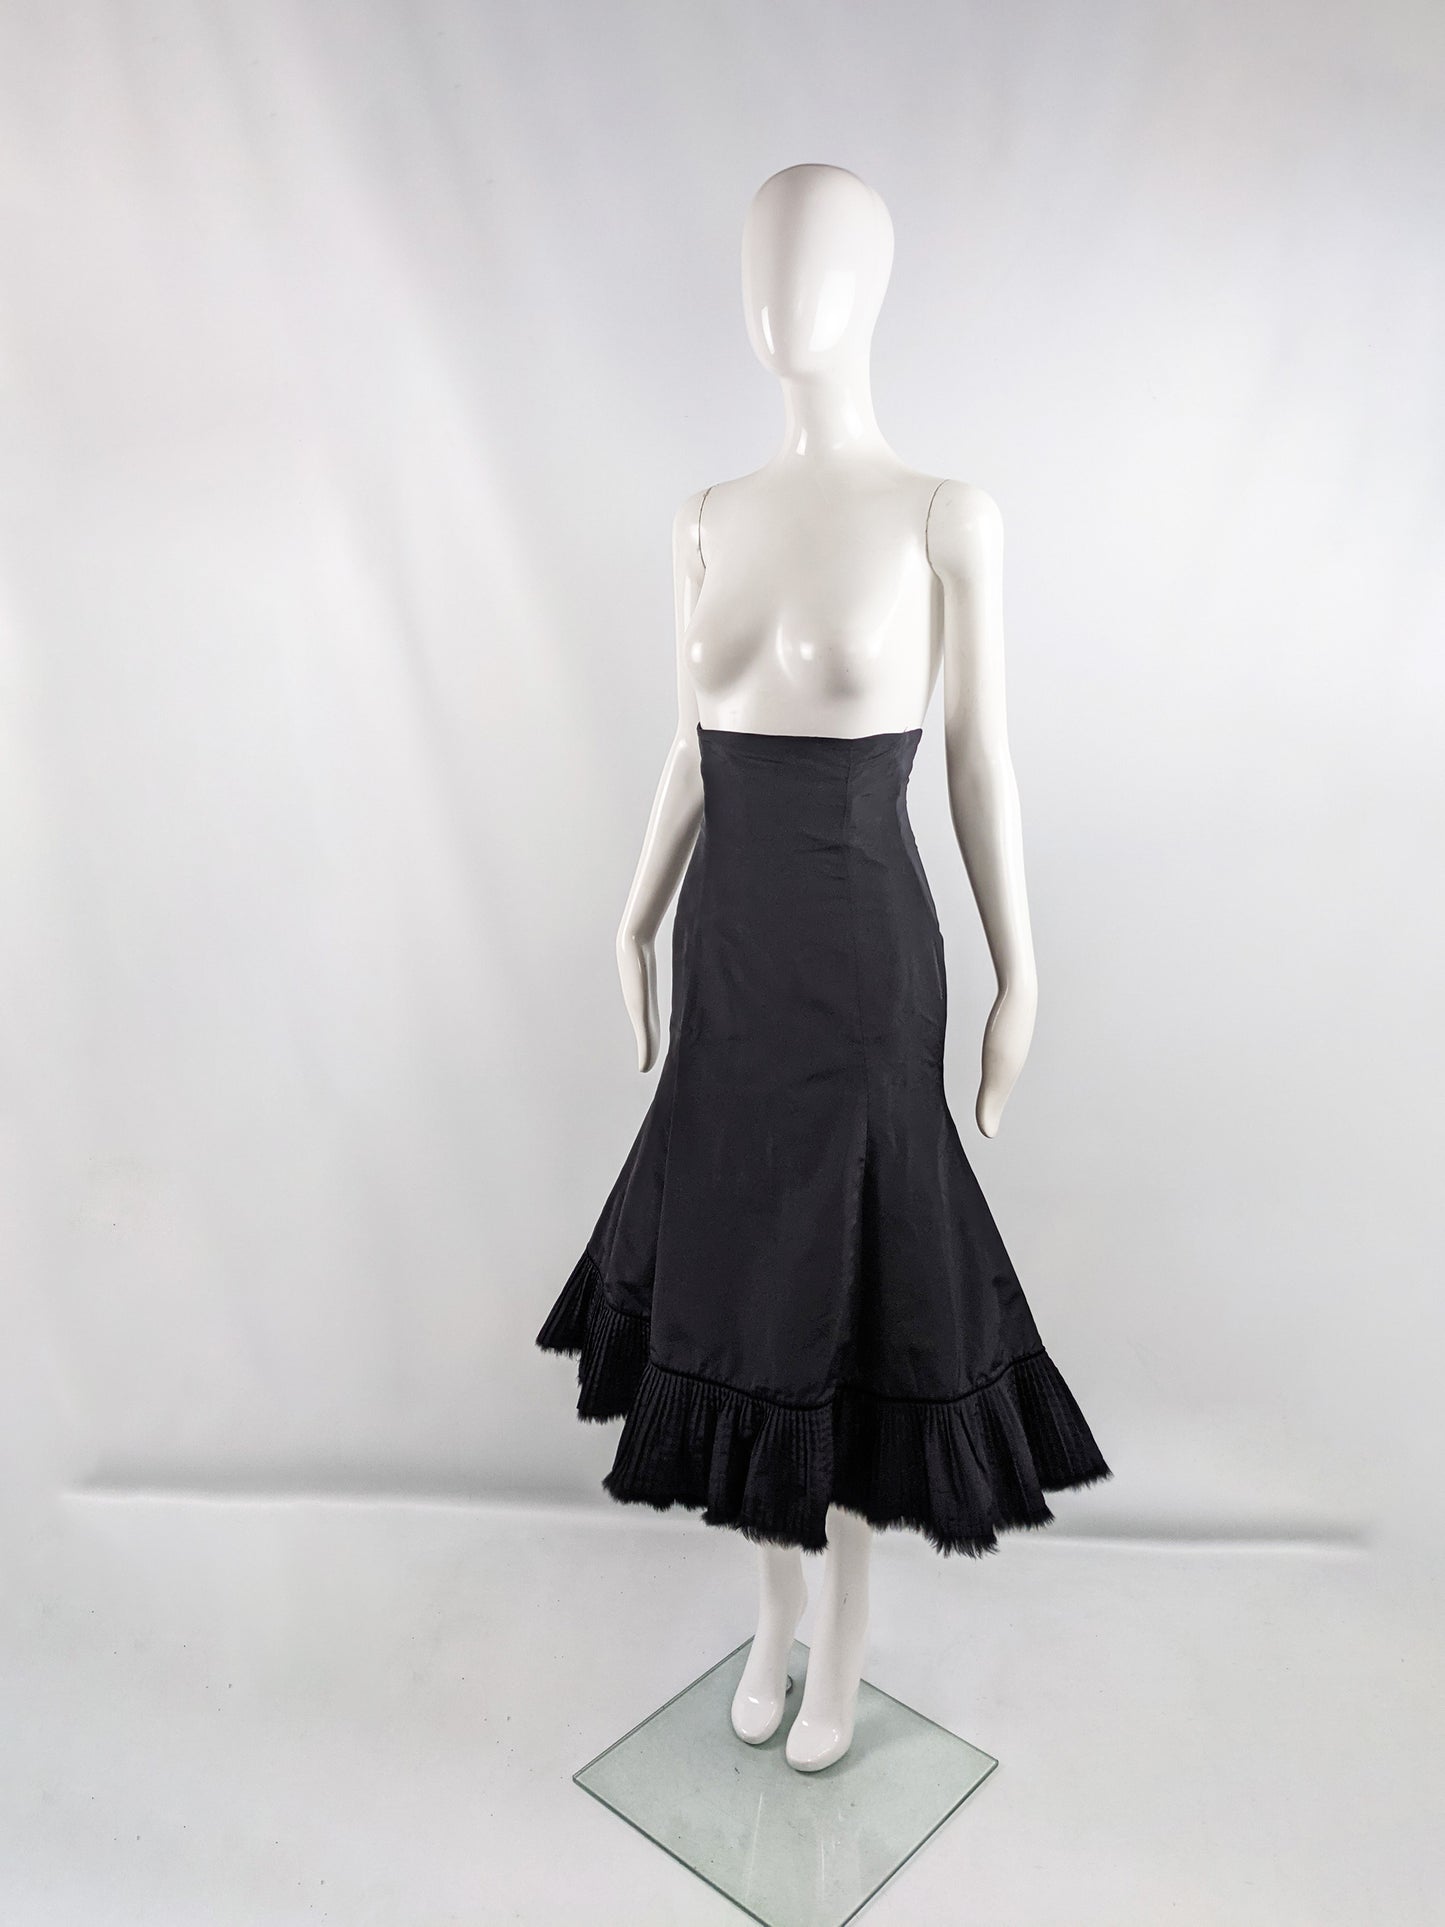 Preowned Black Ultra High Waist Structured Mermaid Skirt, A/W 2005